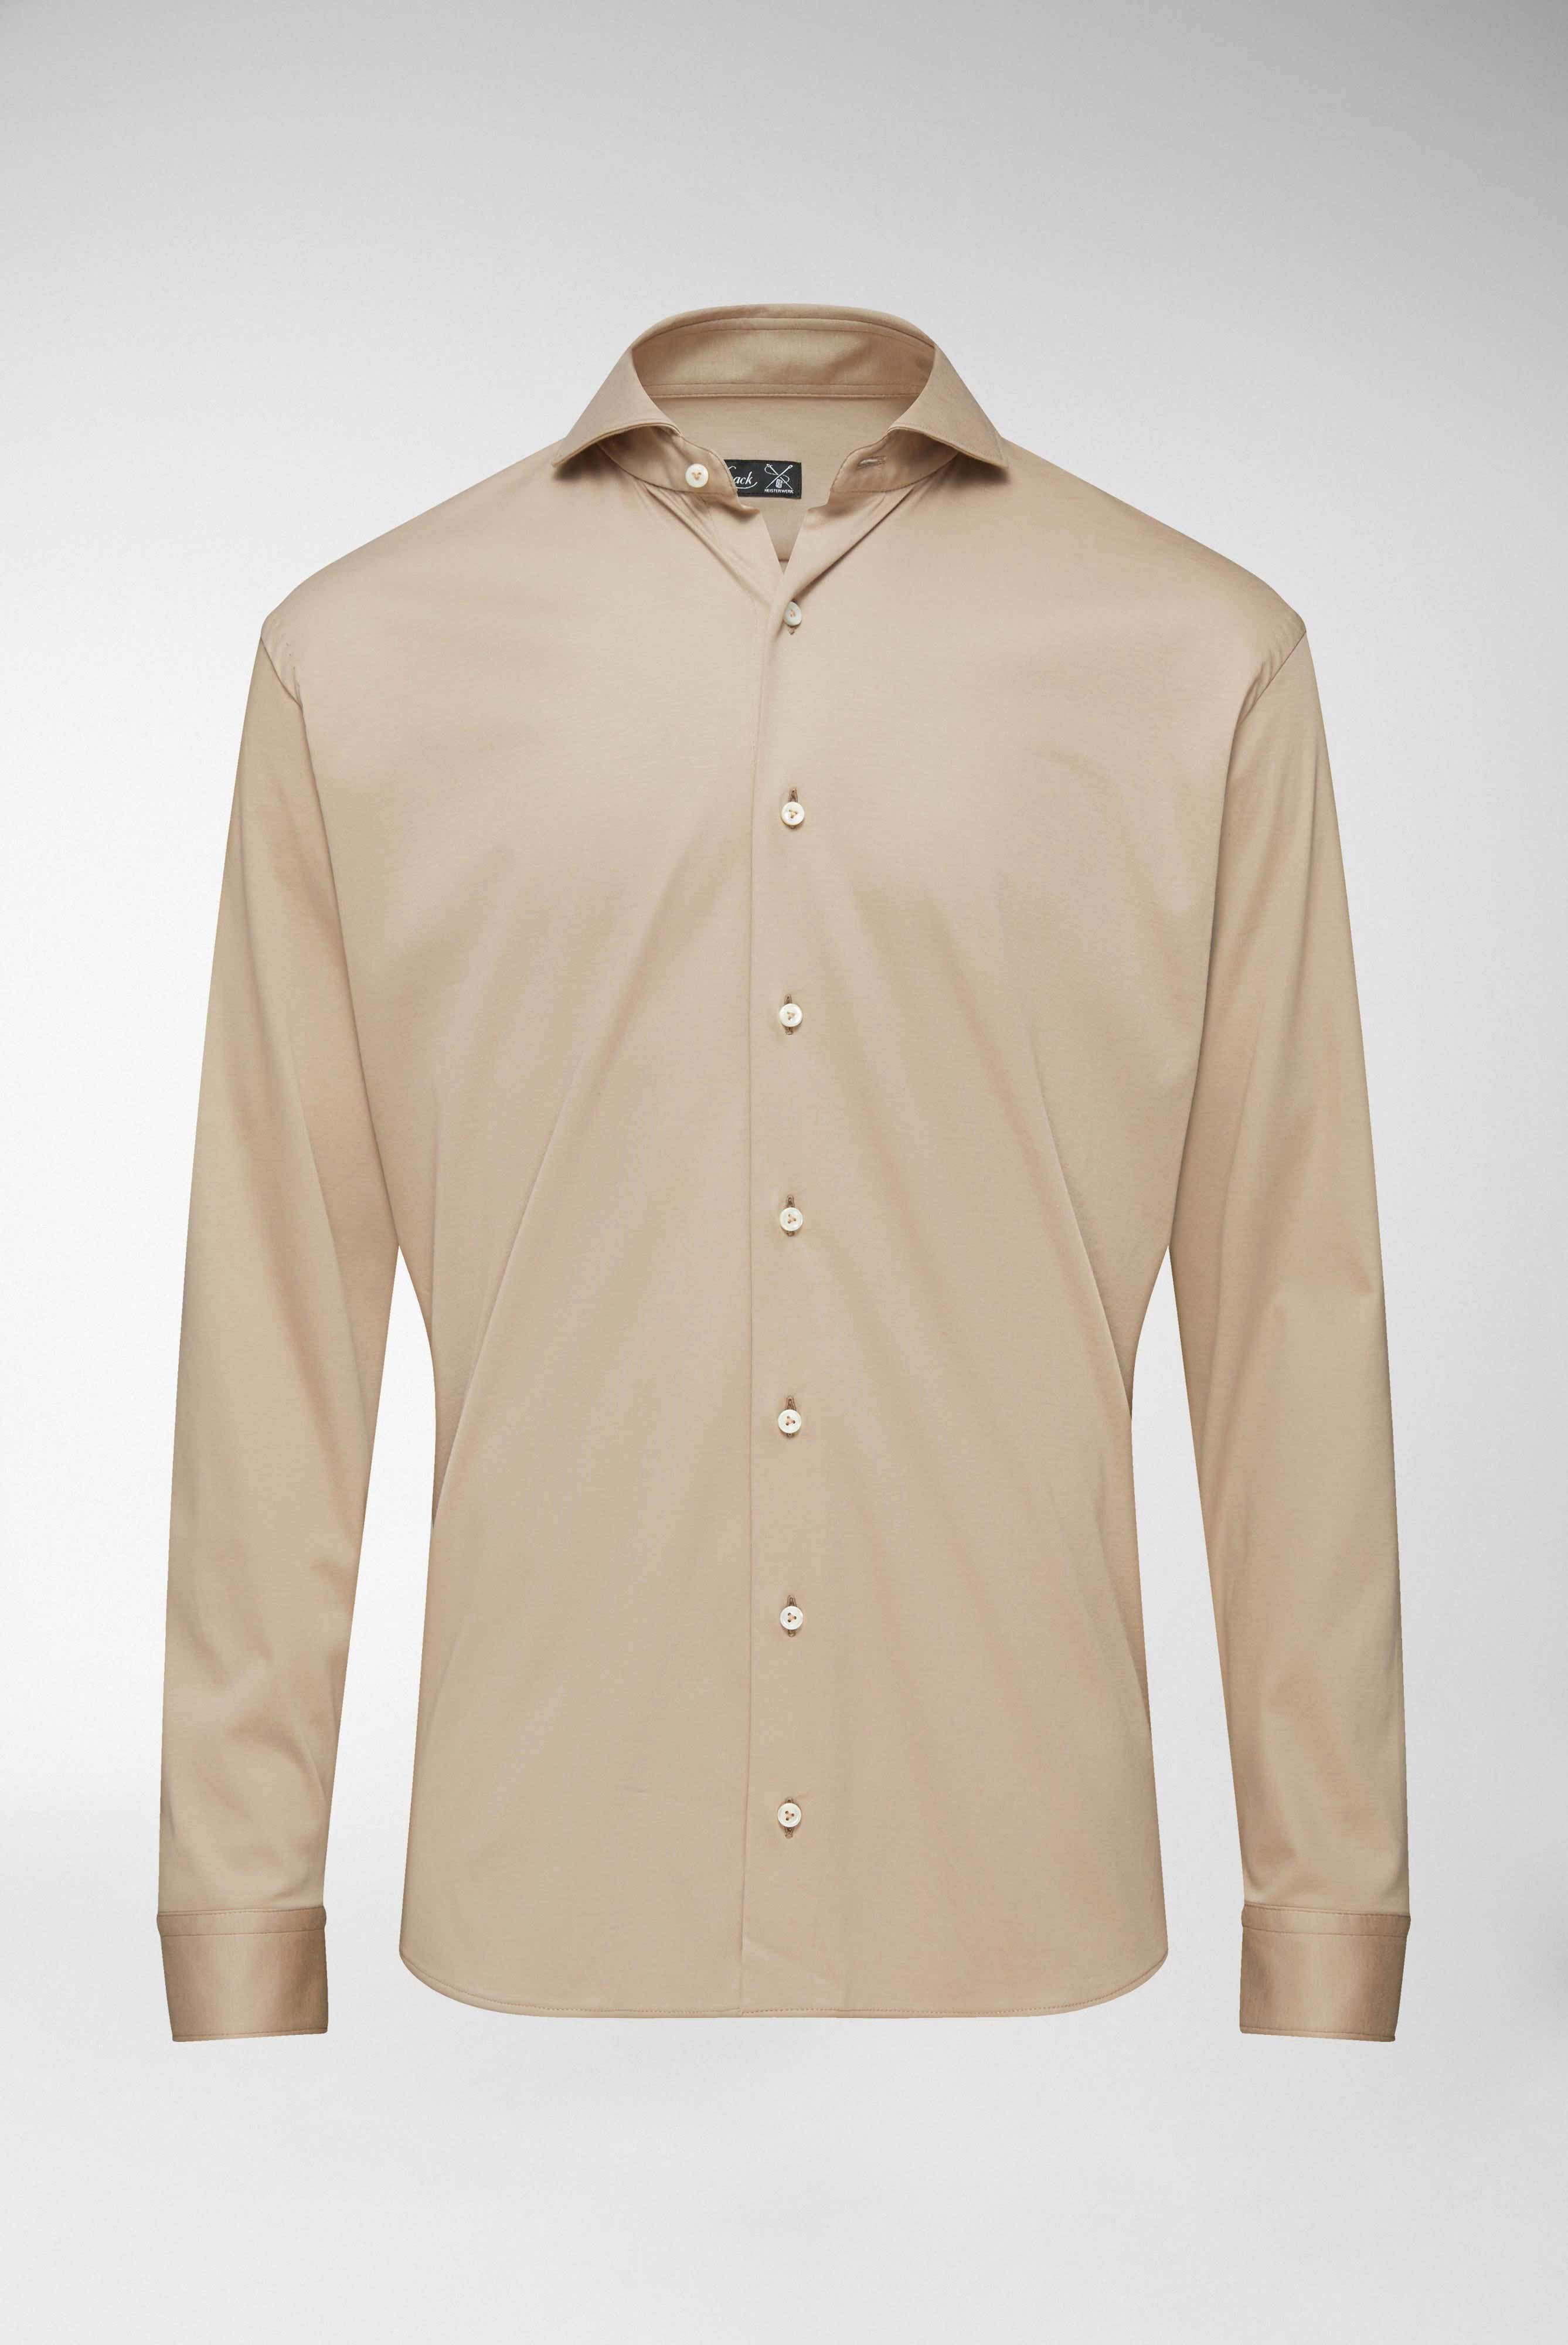 Casual Shirts+Jersey Shirt Swiss Cotton Tailor Fit+20.1683.UC.180031.140.X4L